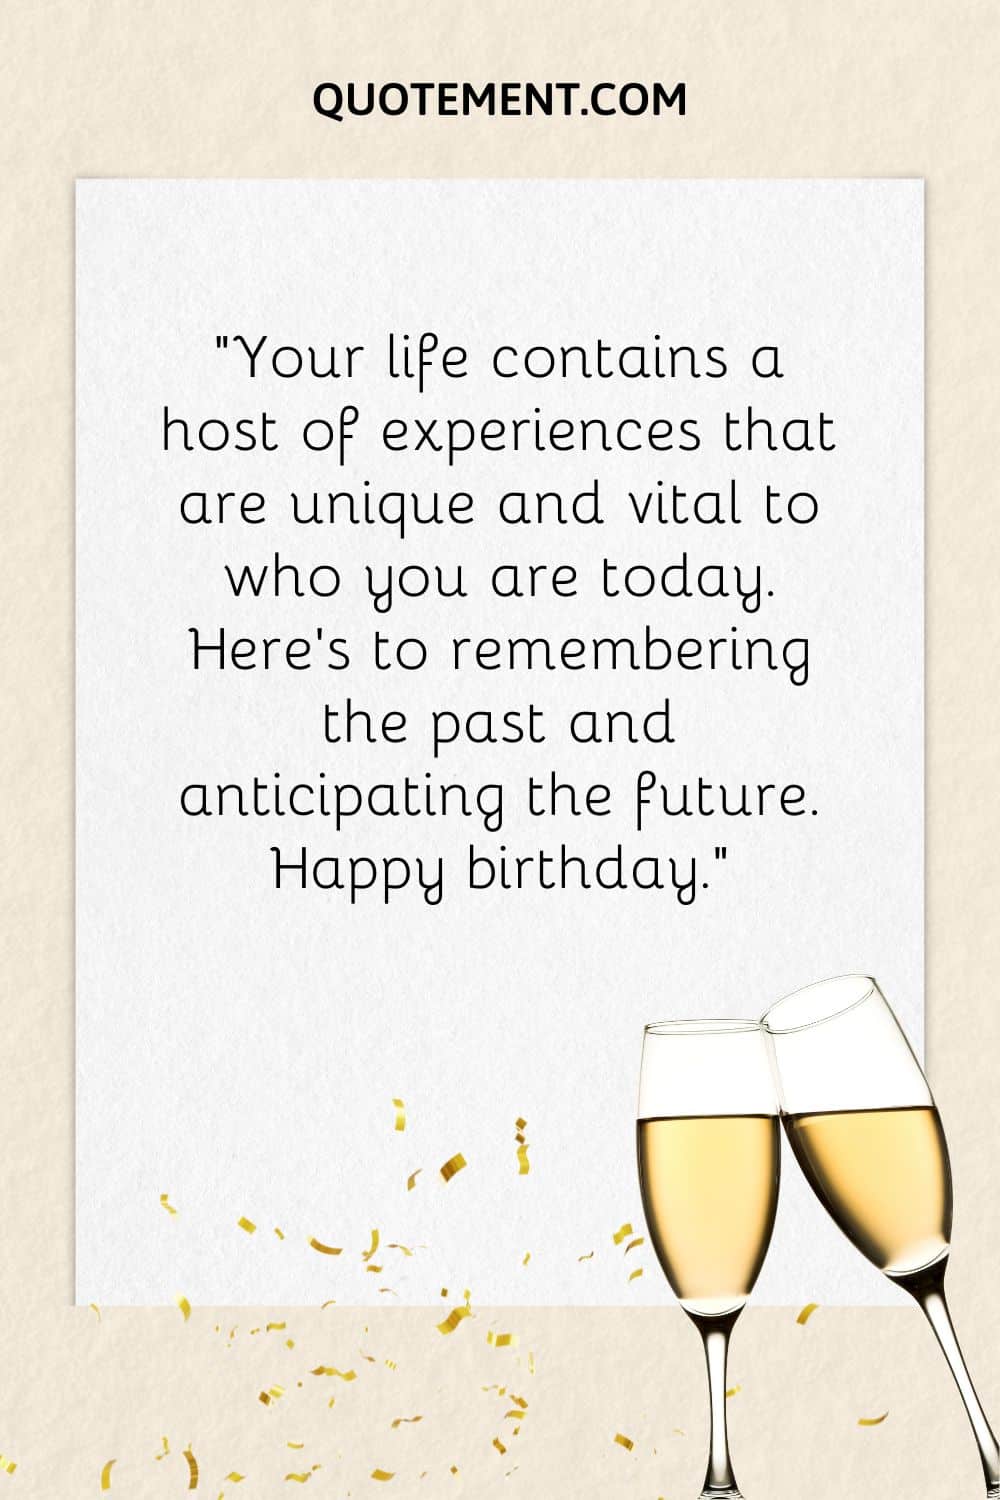 “Your life contains a host of experiences that are unique and vital to who you are today. Here’s to remembering the past and anticipating the future. Happy birthday.”